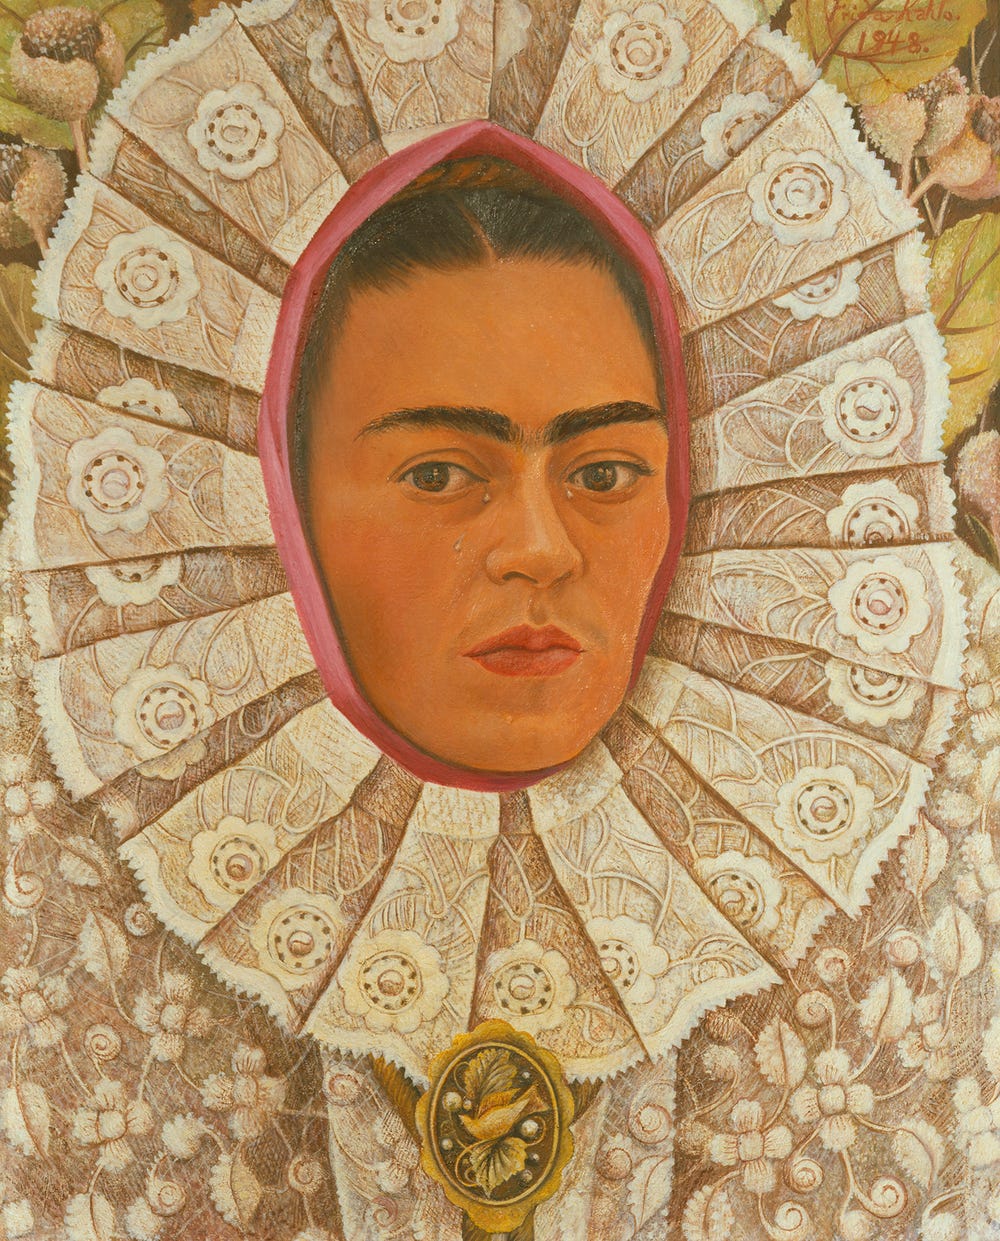 painting of a close-up of Frida Kahlo's face, surrounded by lace